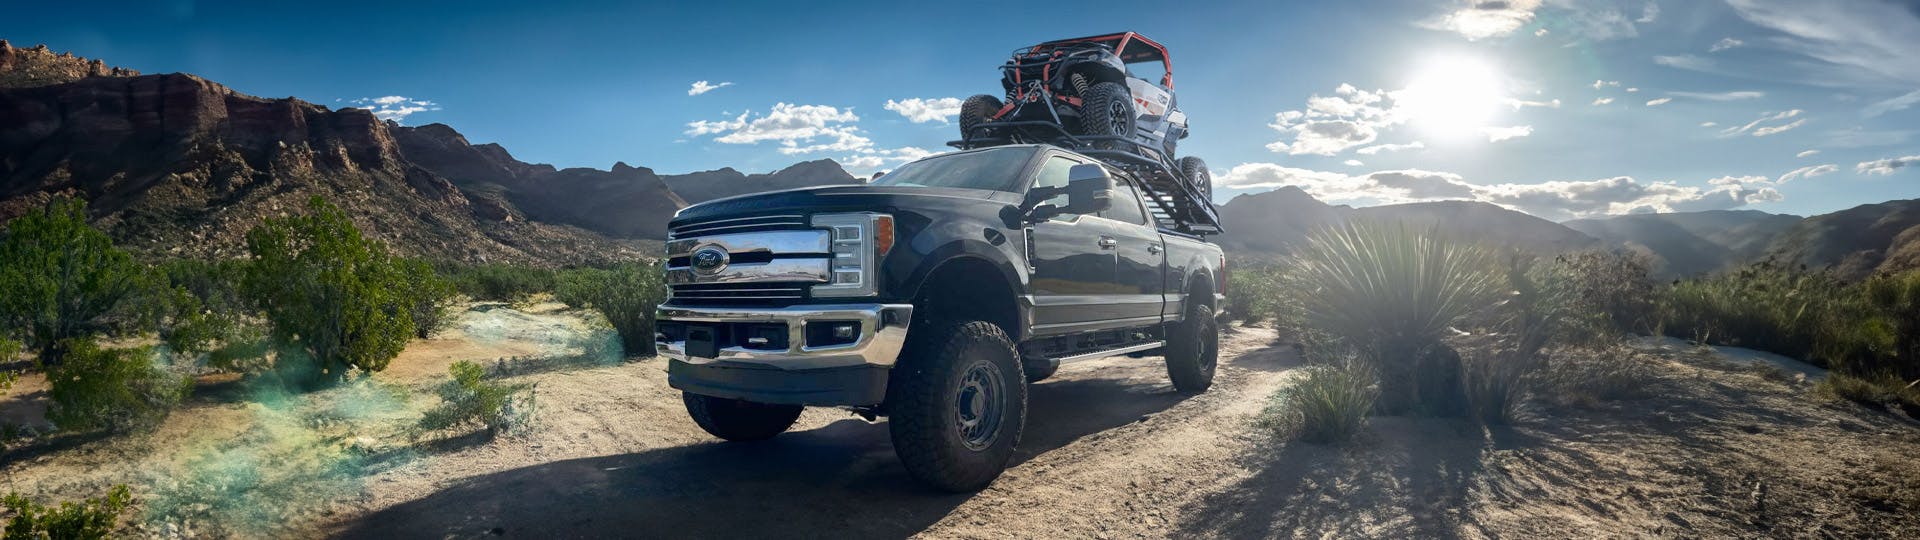 Lifted truck with LoadLifter 5000 installed